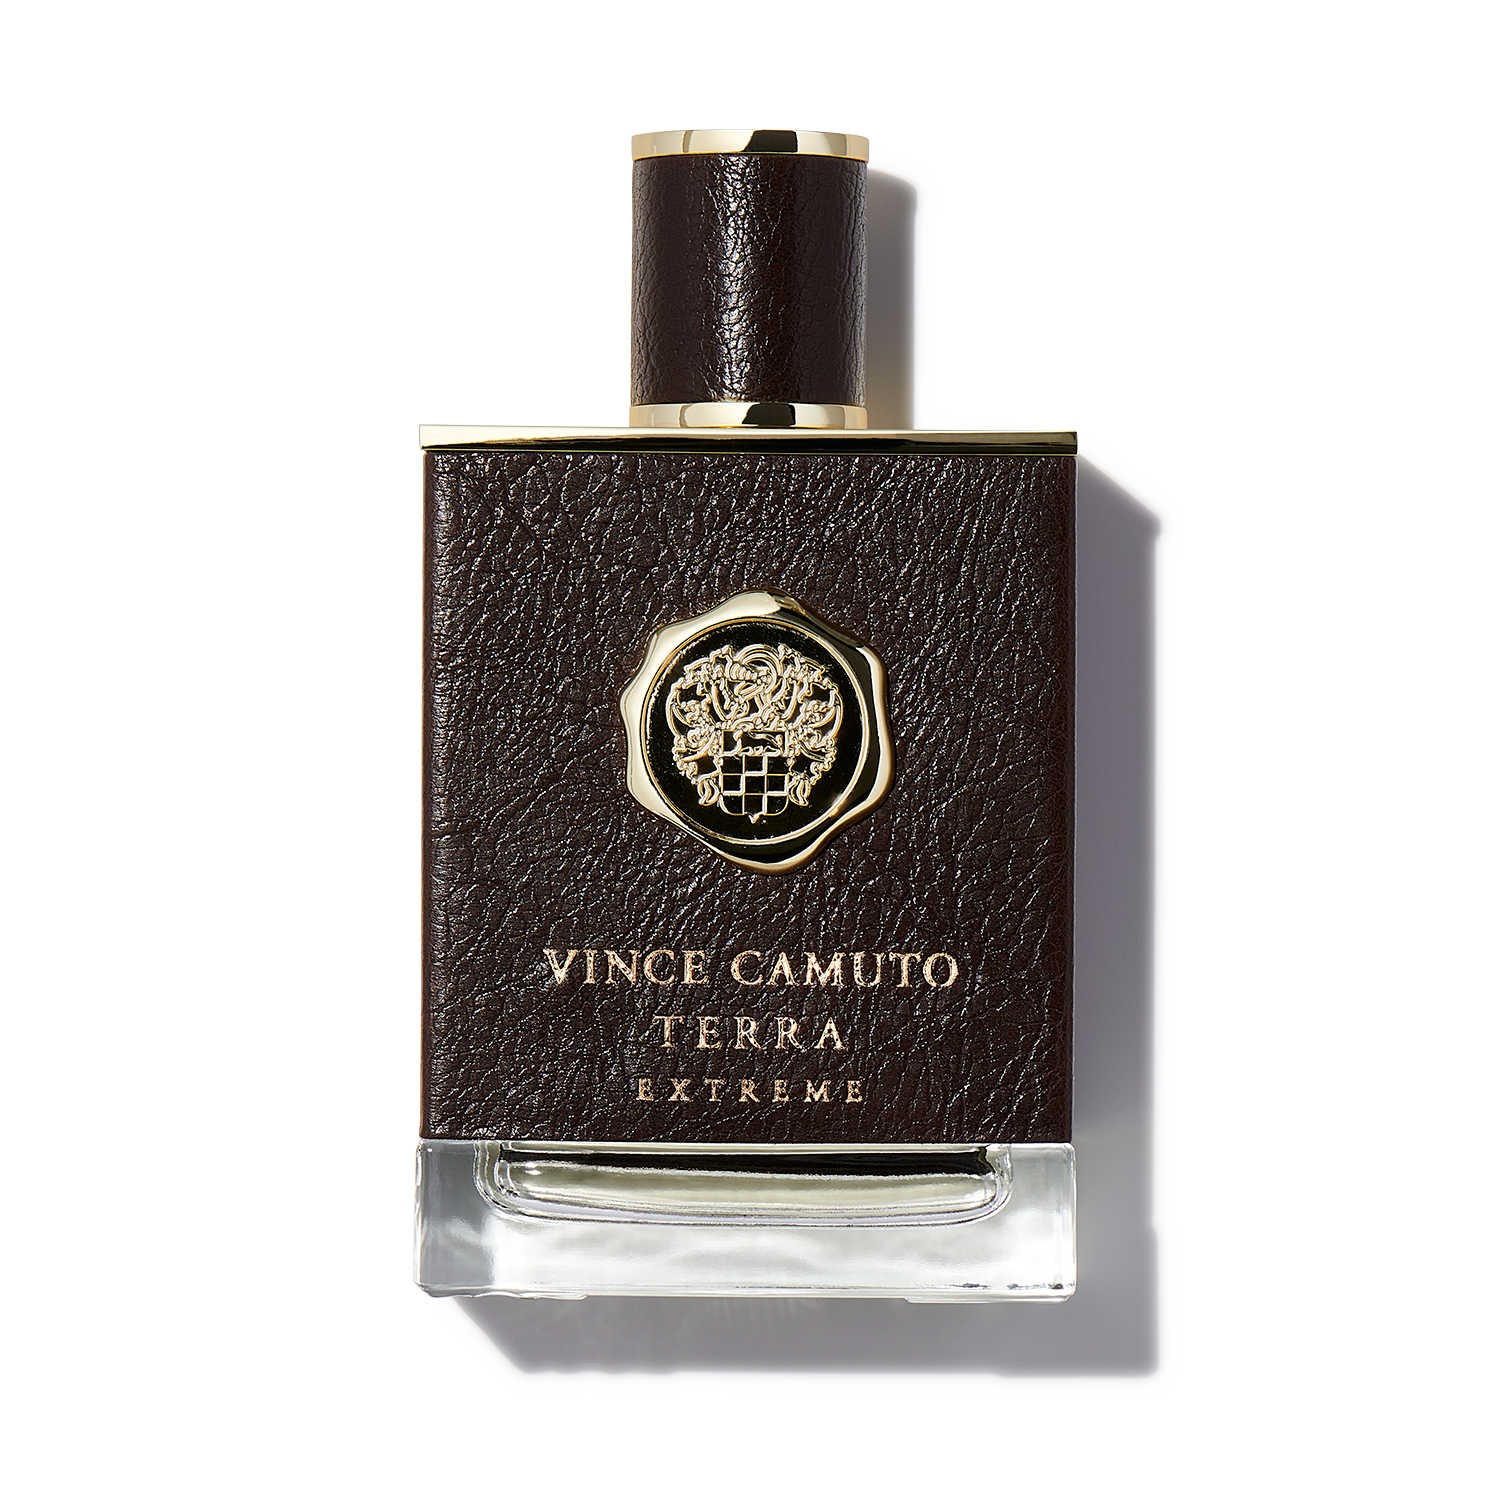 Terra Extreme, our new eau de parfum for men, is the perfect scent for any  adventure. #vincecamutomens #mensfragrance